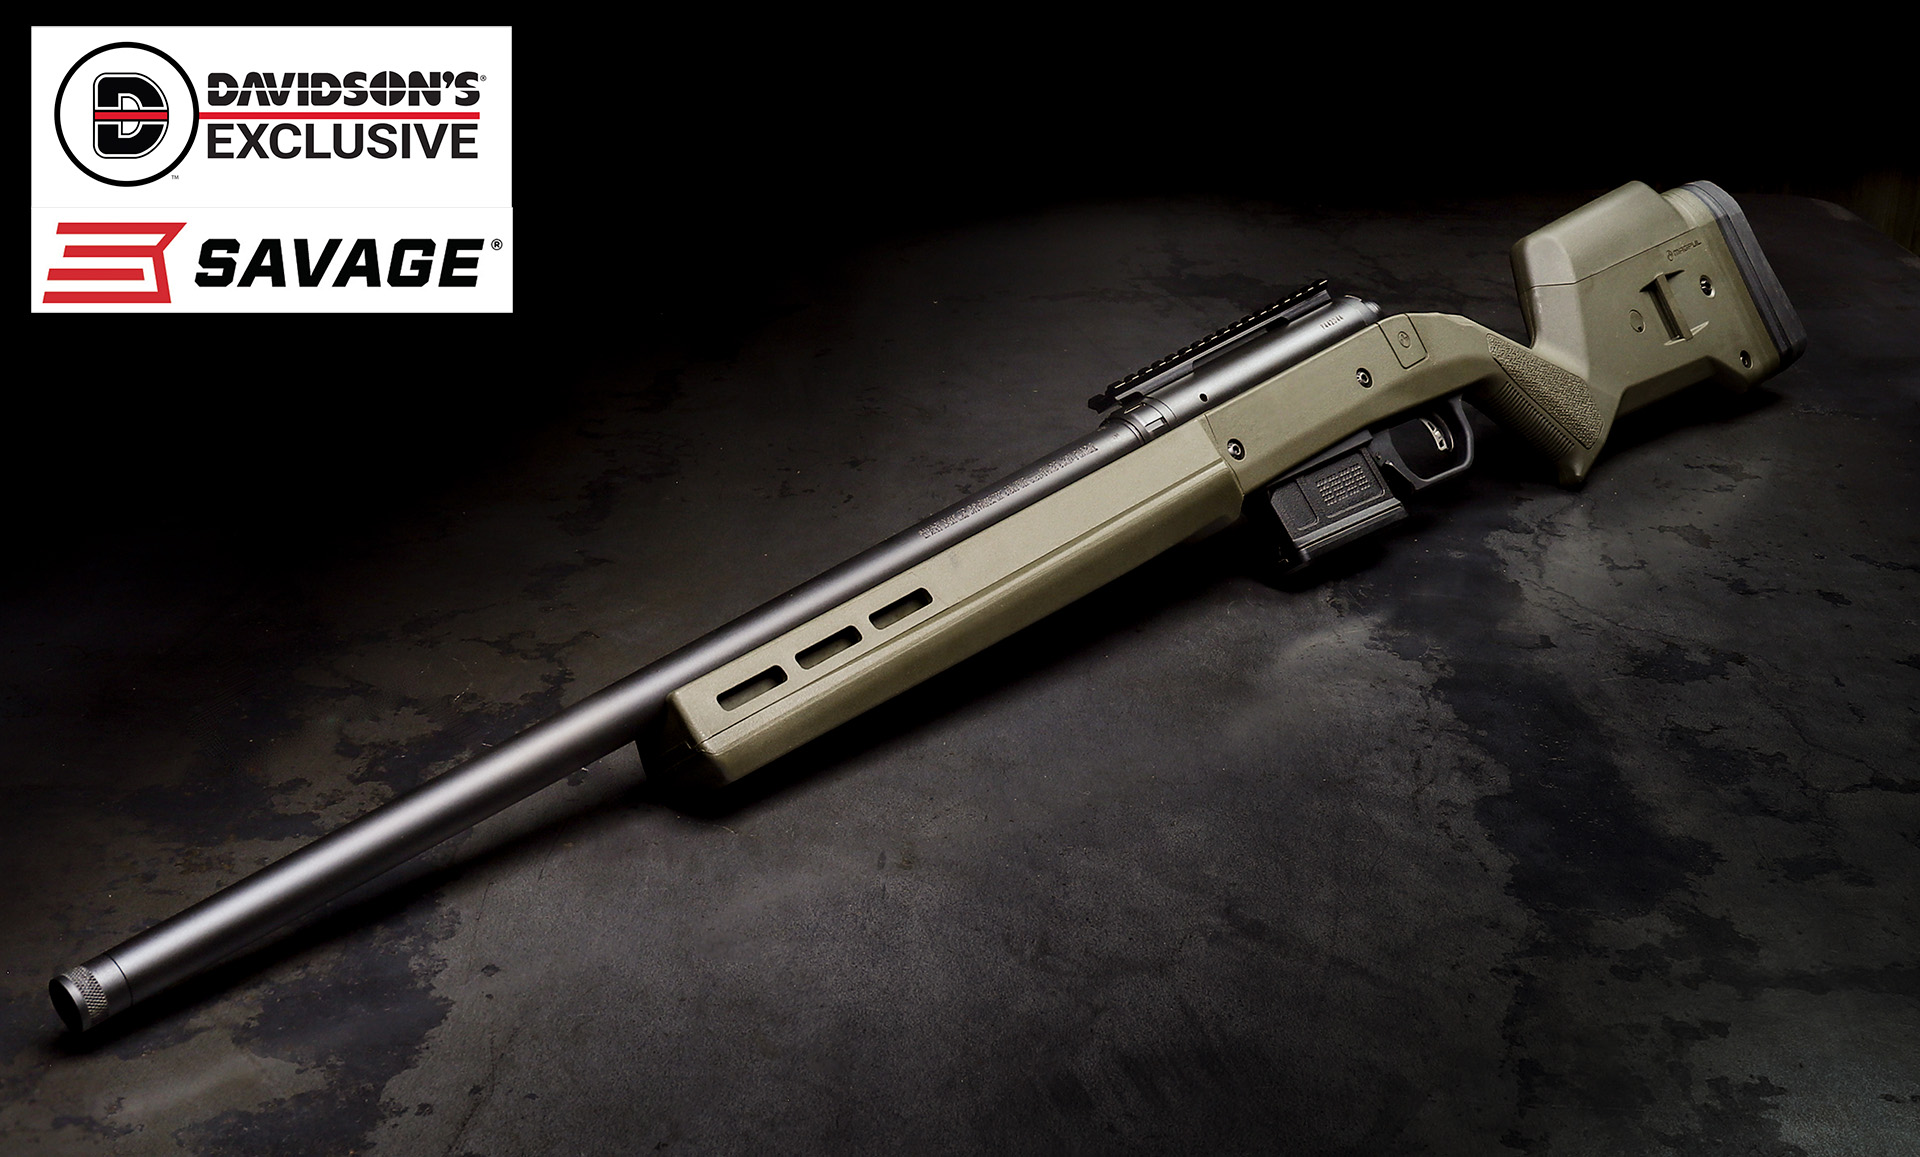 Davidson's Introduces the New Exclusive Savage 110 Magpul Hunter Rifle